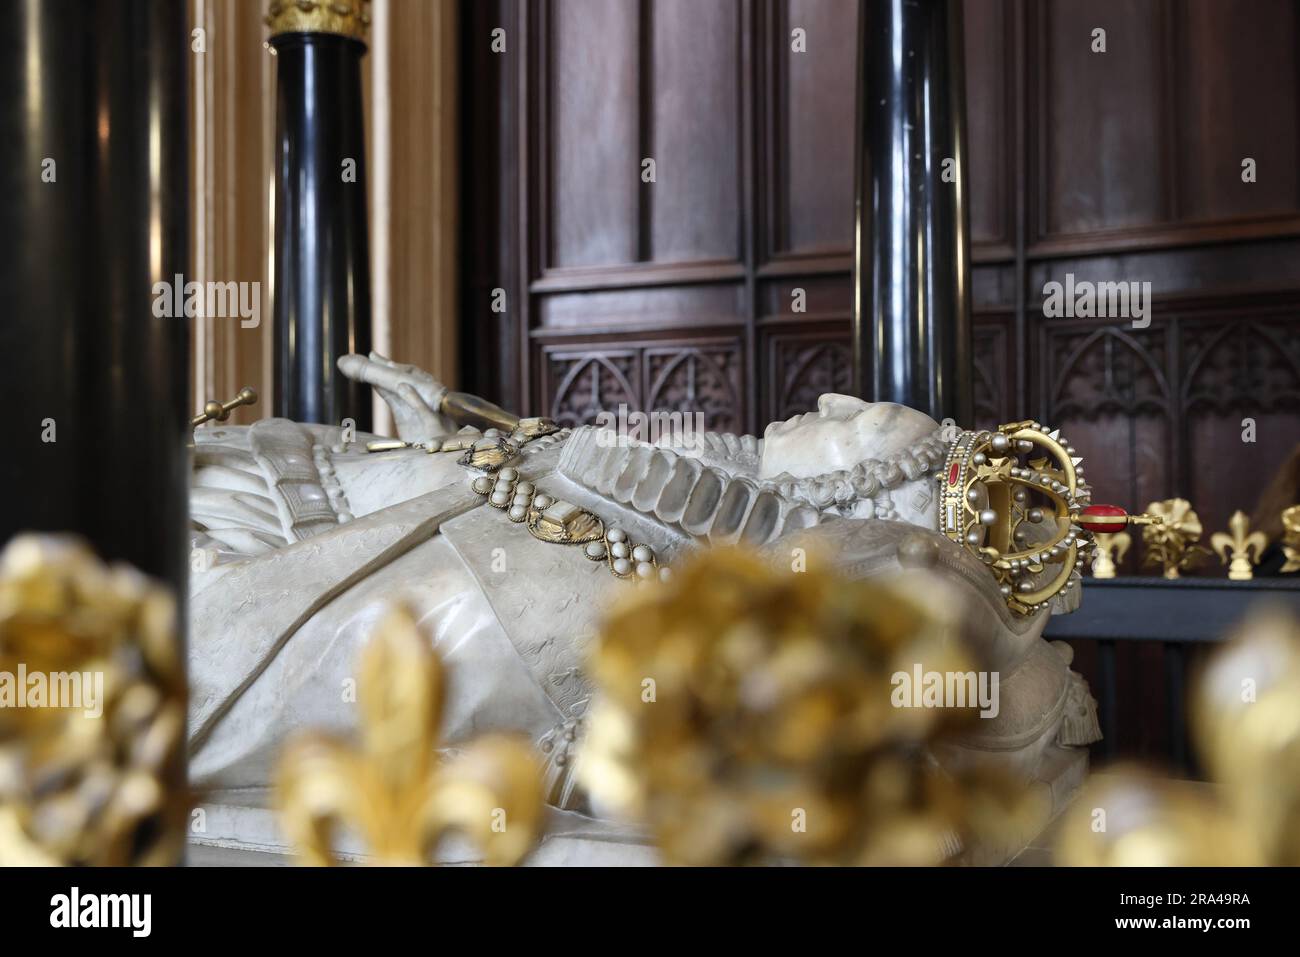 The tombs of the Queens Elizabeth I and Mary I in Westminster Abbey, London, UK Stock Photo